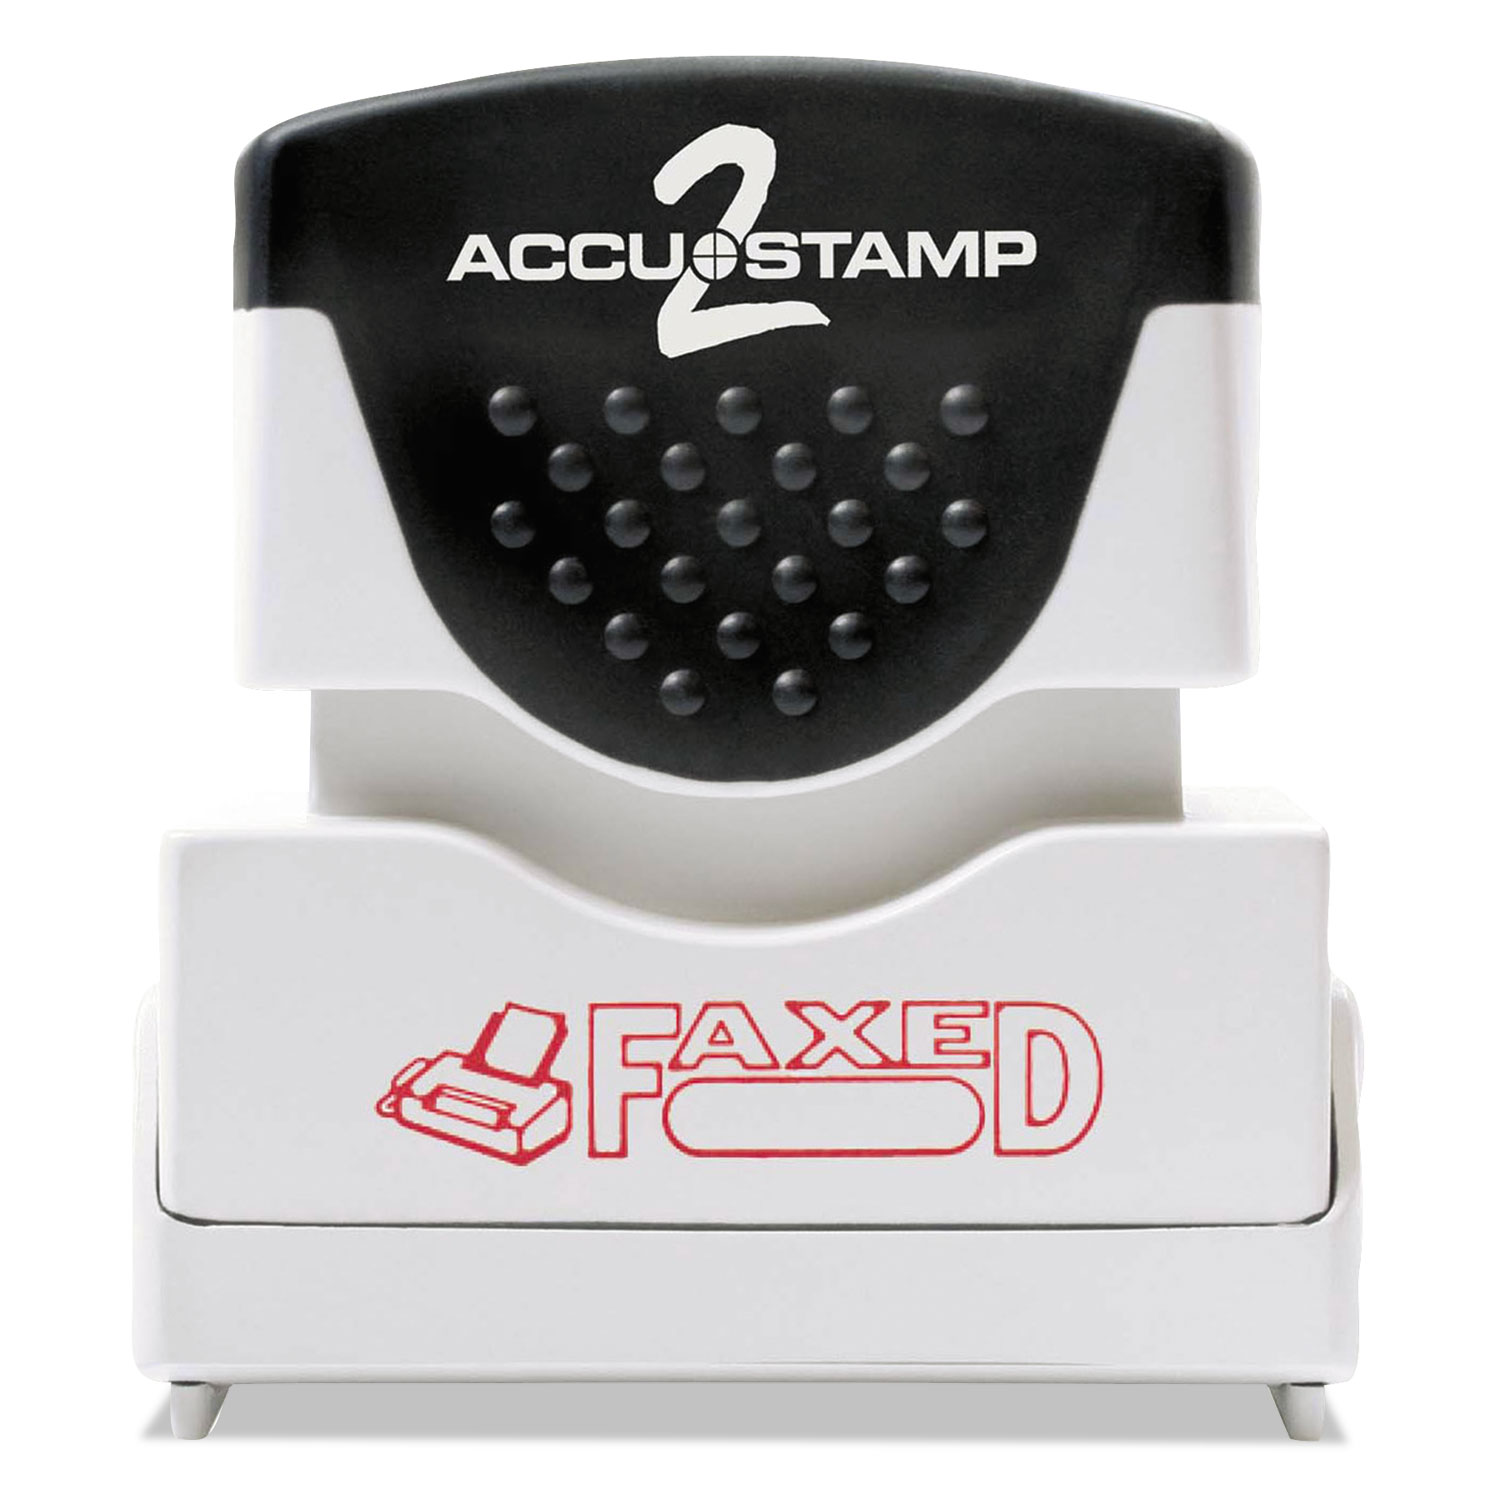  ACCUSTAMP2 035583 Pre-Inked Shutter Stamp, Red, FAXED, 1 5/8 x 1/2 (COS035583) 